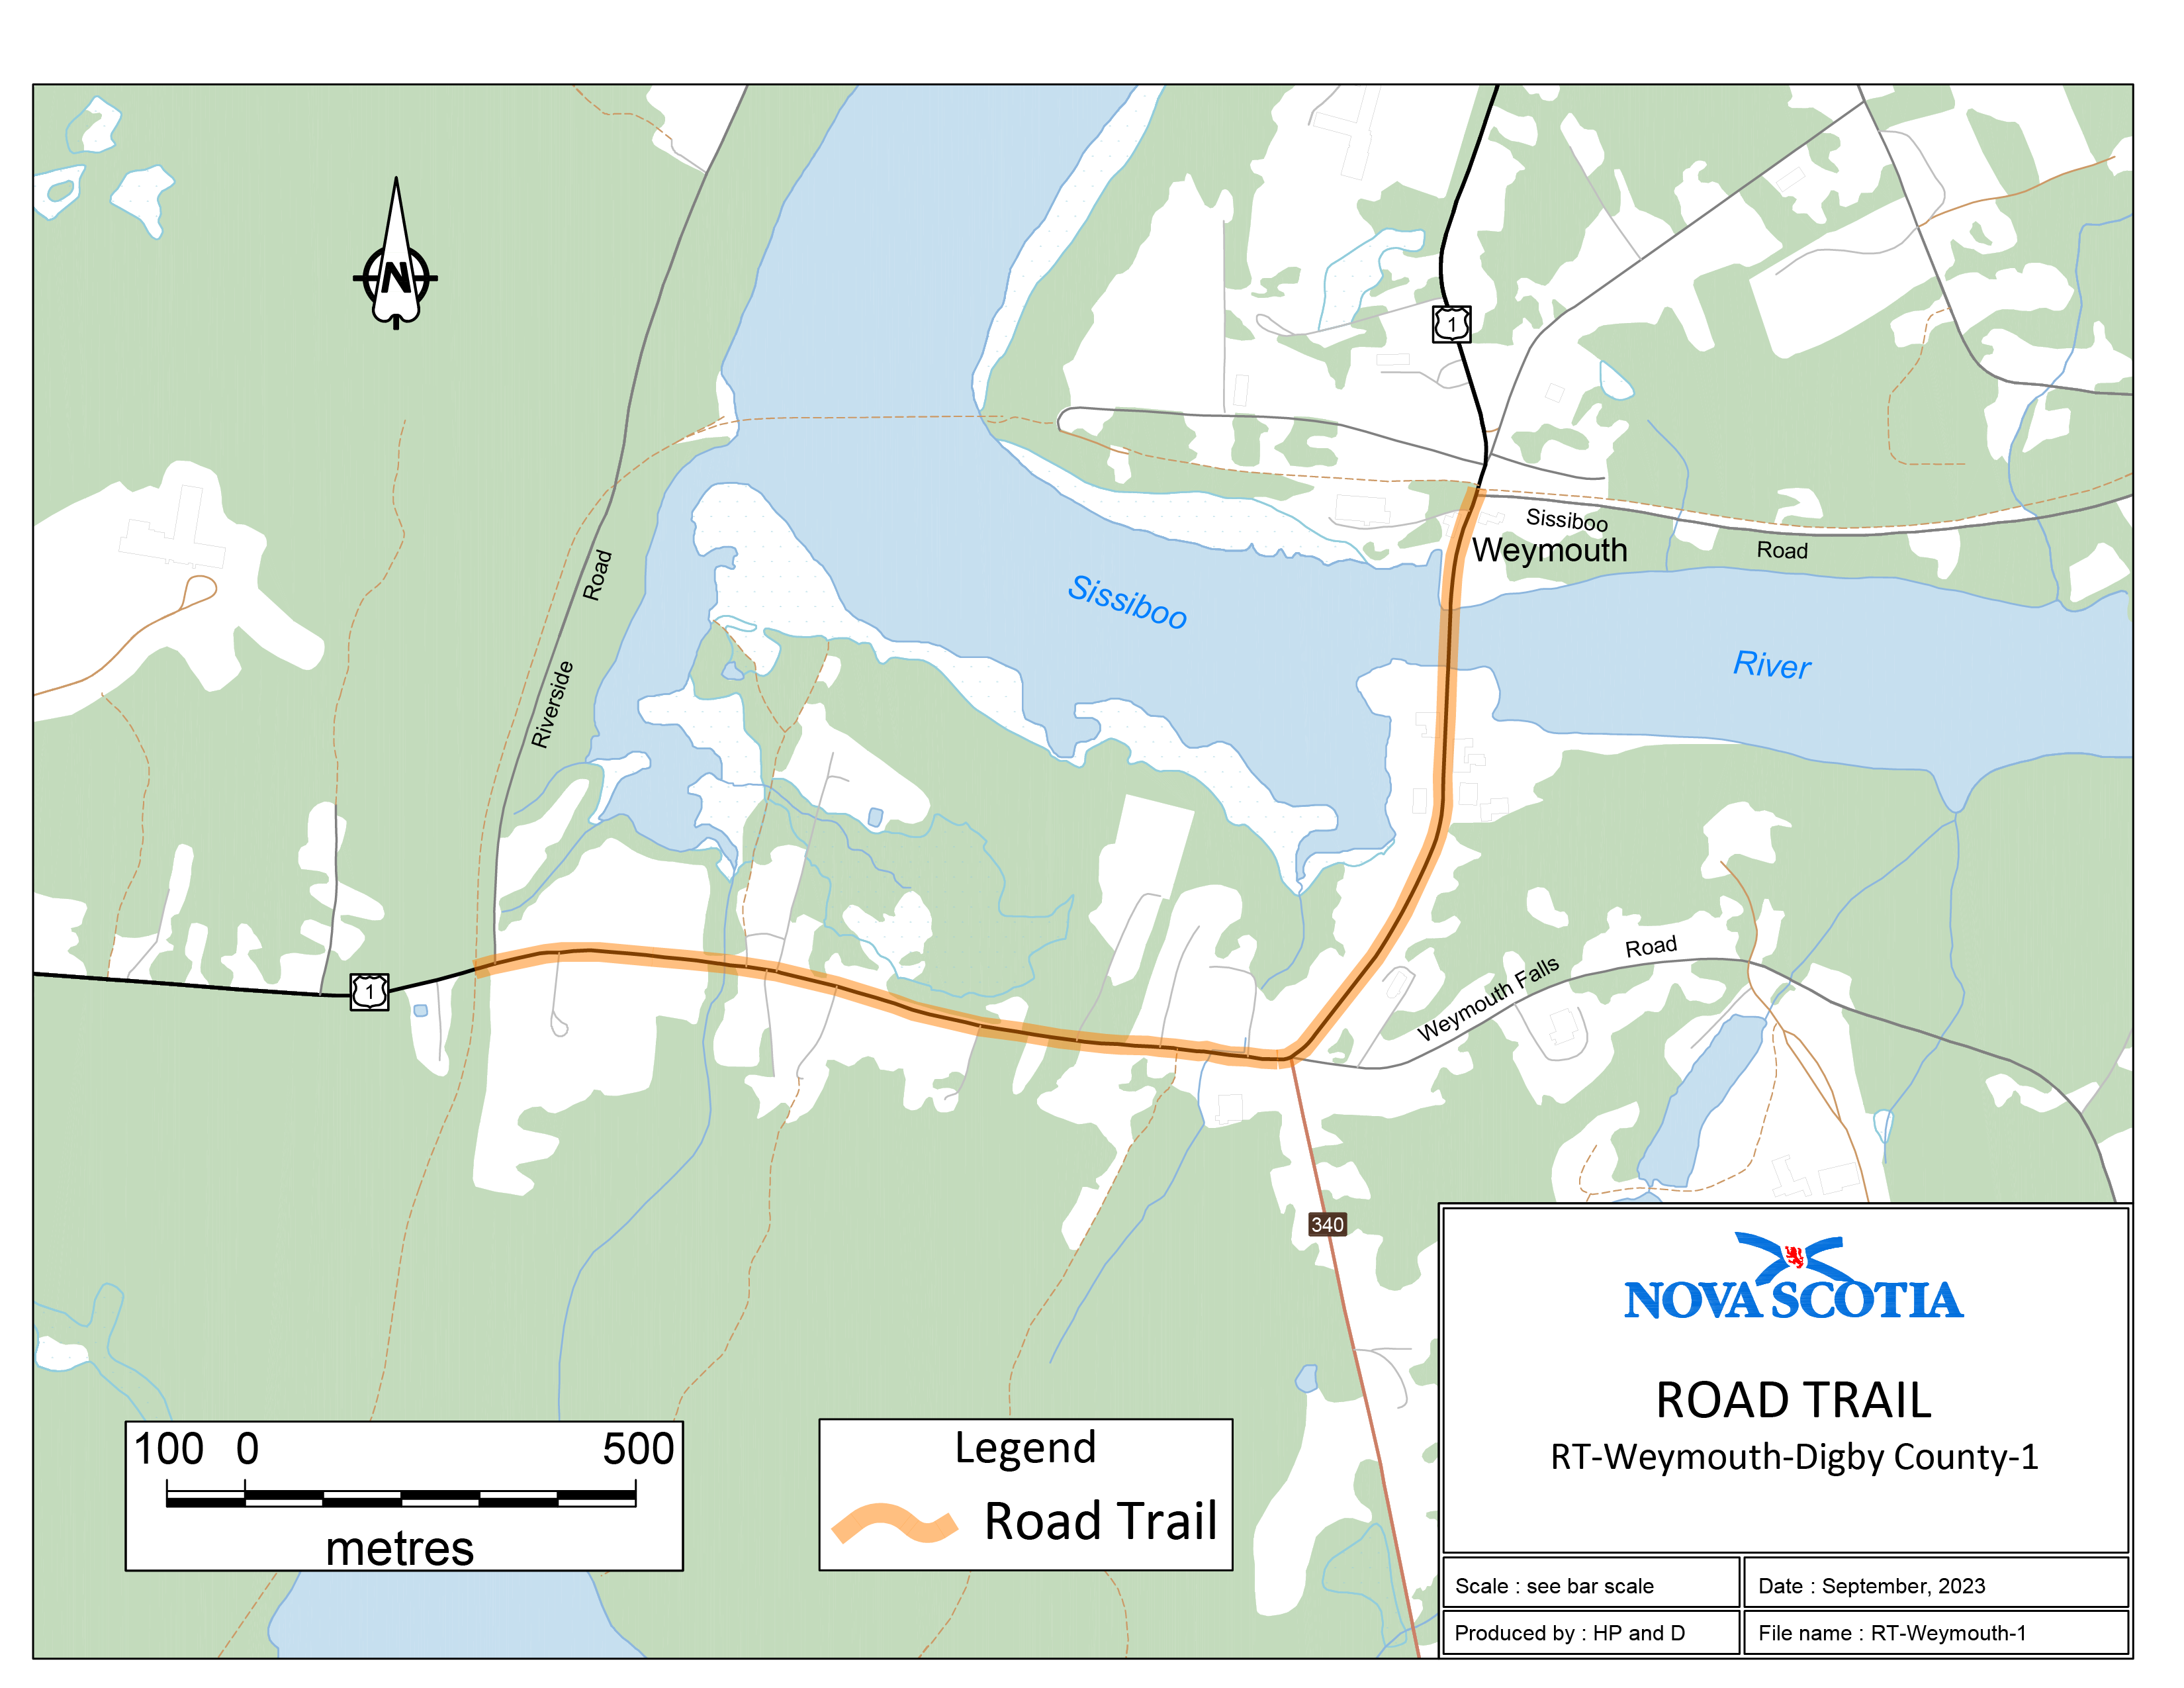 Graphic showing map of the Weymouth Road Trail